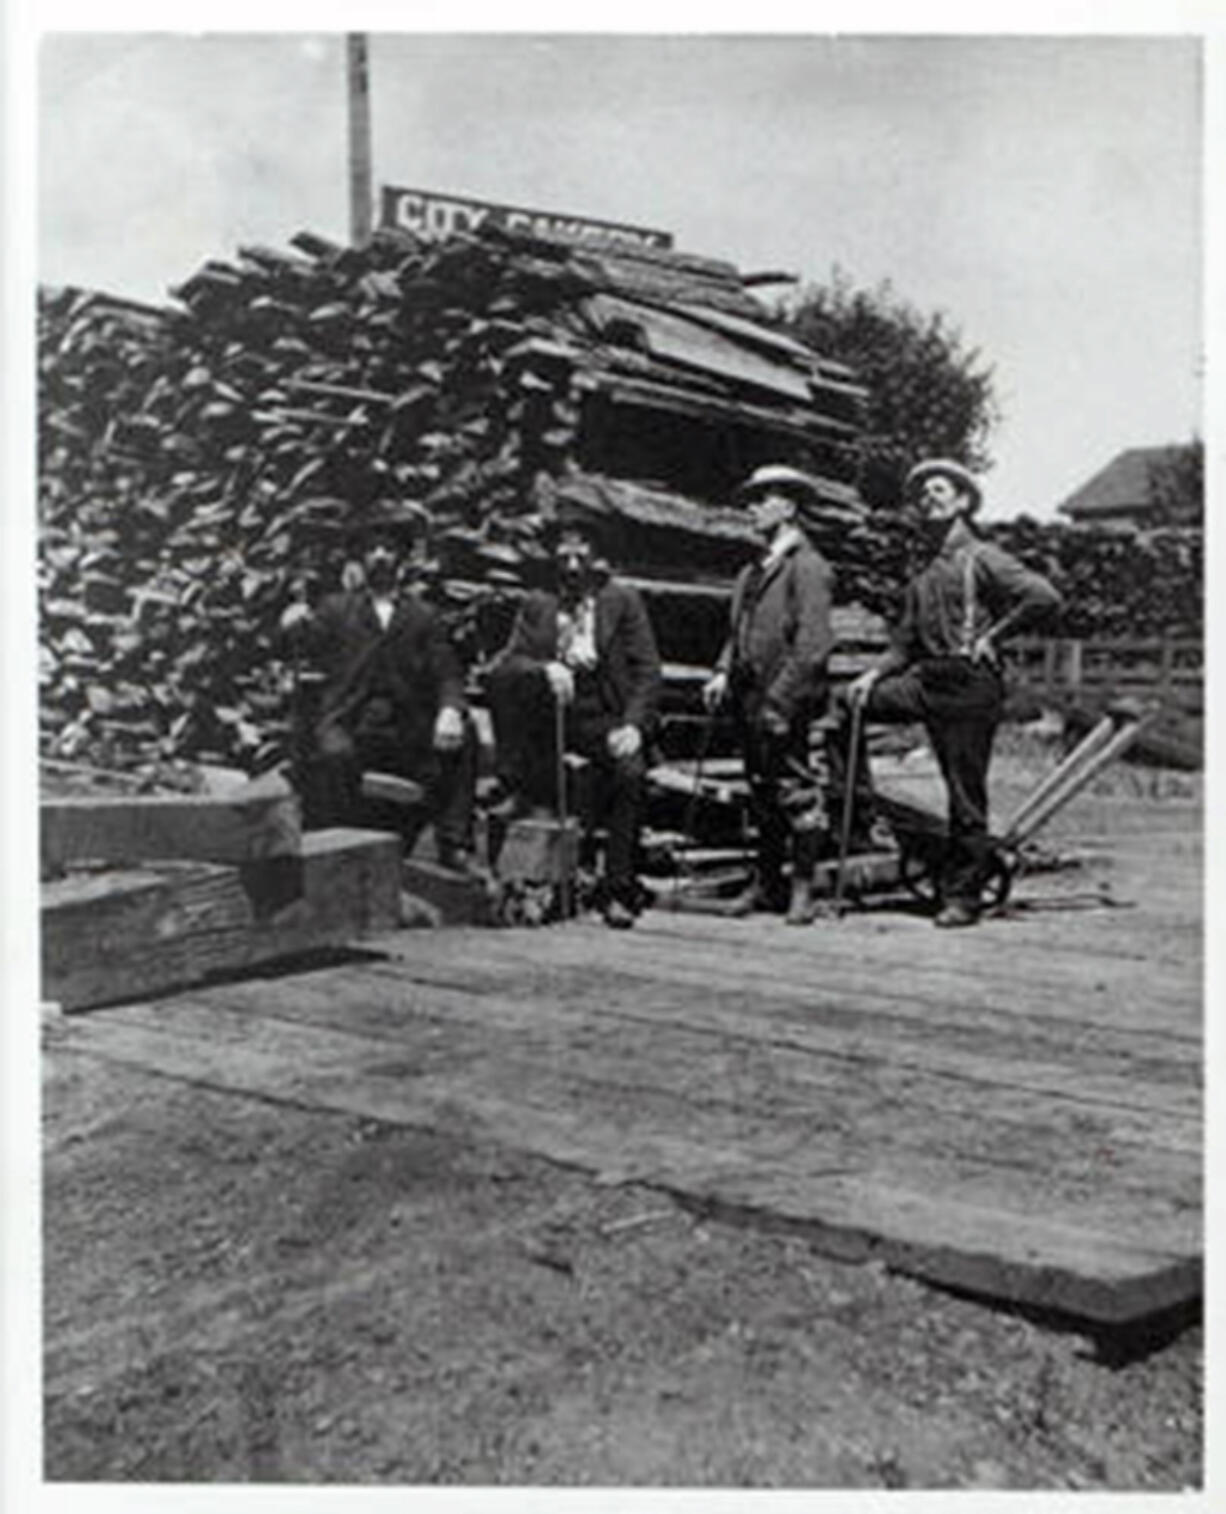 Vancouver was losing money on its first electricity generation plant when Joe Harvey offered to buy it in 1901 and run it as a regulated private utility company. He stands second from the right wearing a suit. On his right stands his older brother with a foot on the woodpile. As the Vancouver Electric Light and Power Company, they turned untold cords of wood into electricity to light the city.